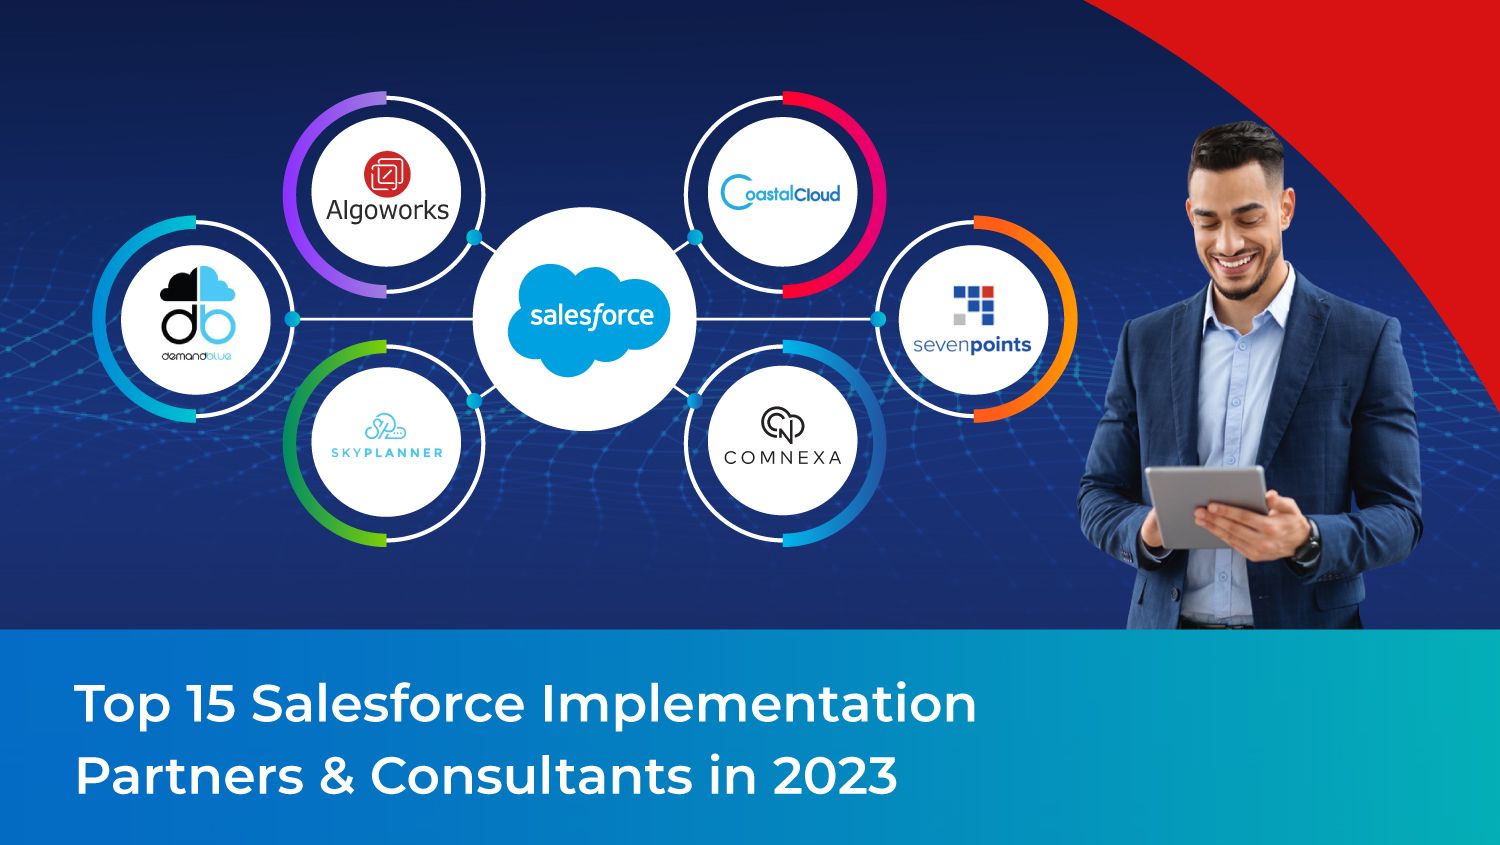 Top 15 Salesforce Implementation Partners & Consultants in 2023